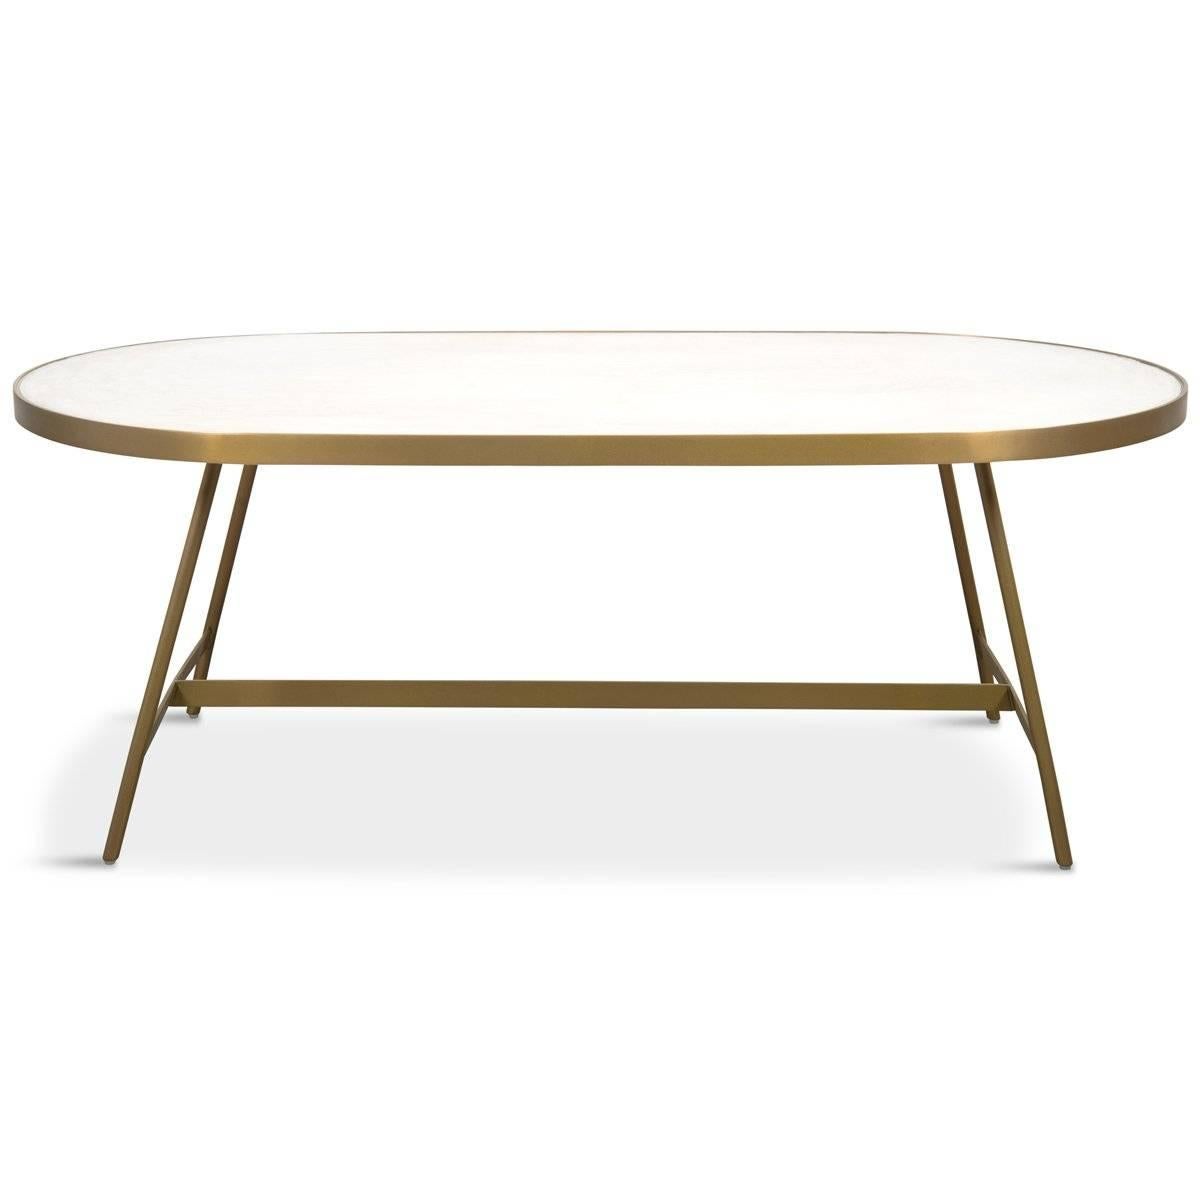 The simple design of the Kingston coffee table features a brushed brass frame with a vanilla stone-like concrete top. A modern and understated beauty, the Kingston has a clean look and an I-beam frame that gives a subtle nod to the world of